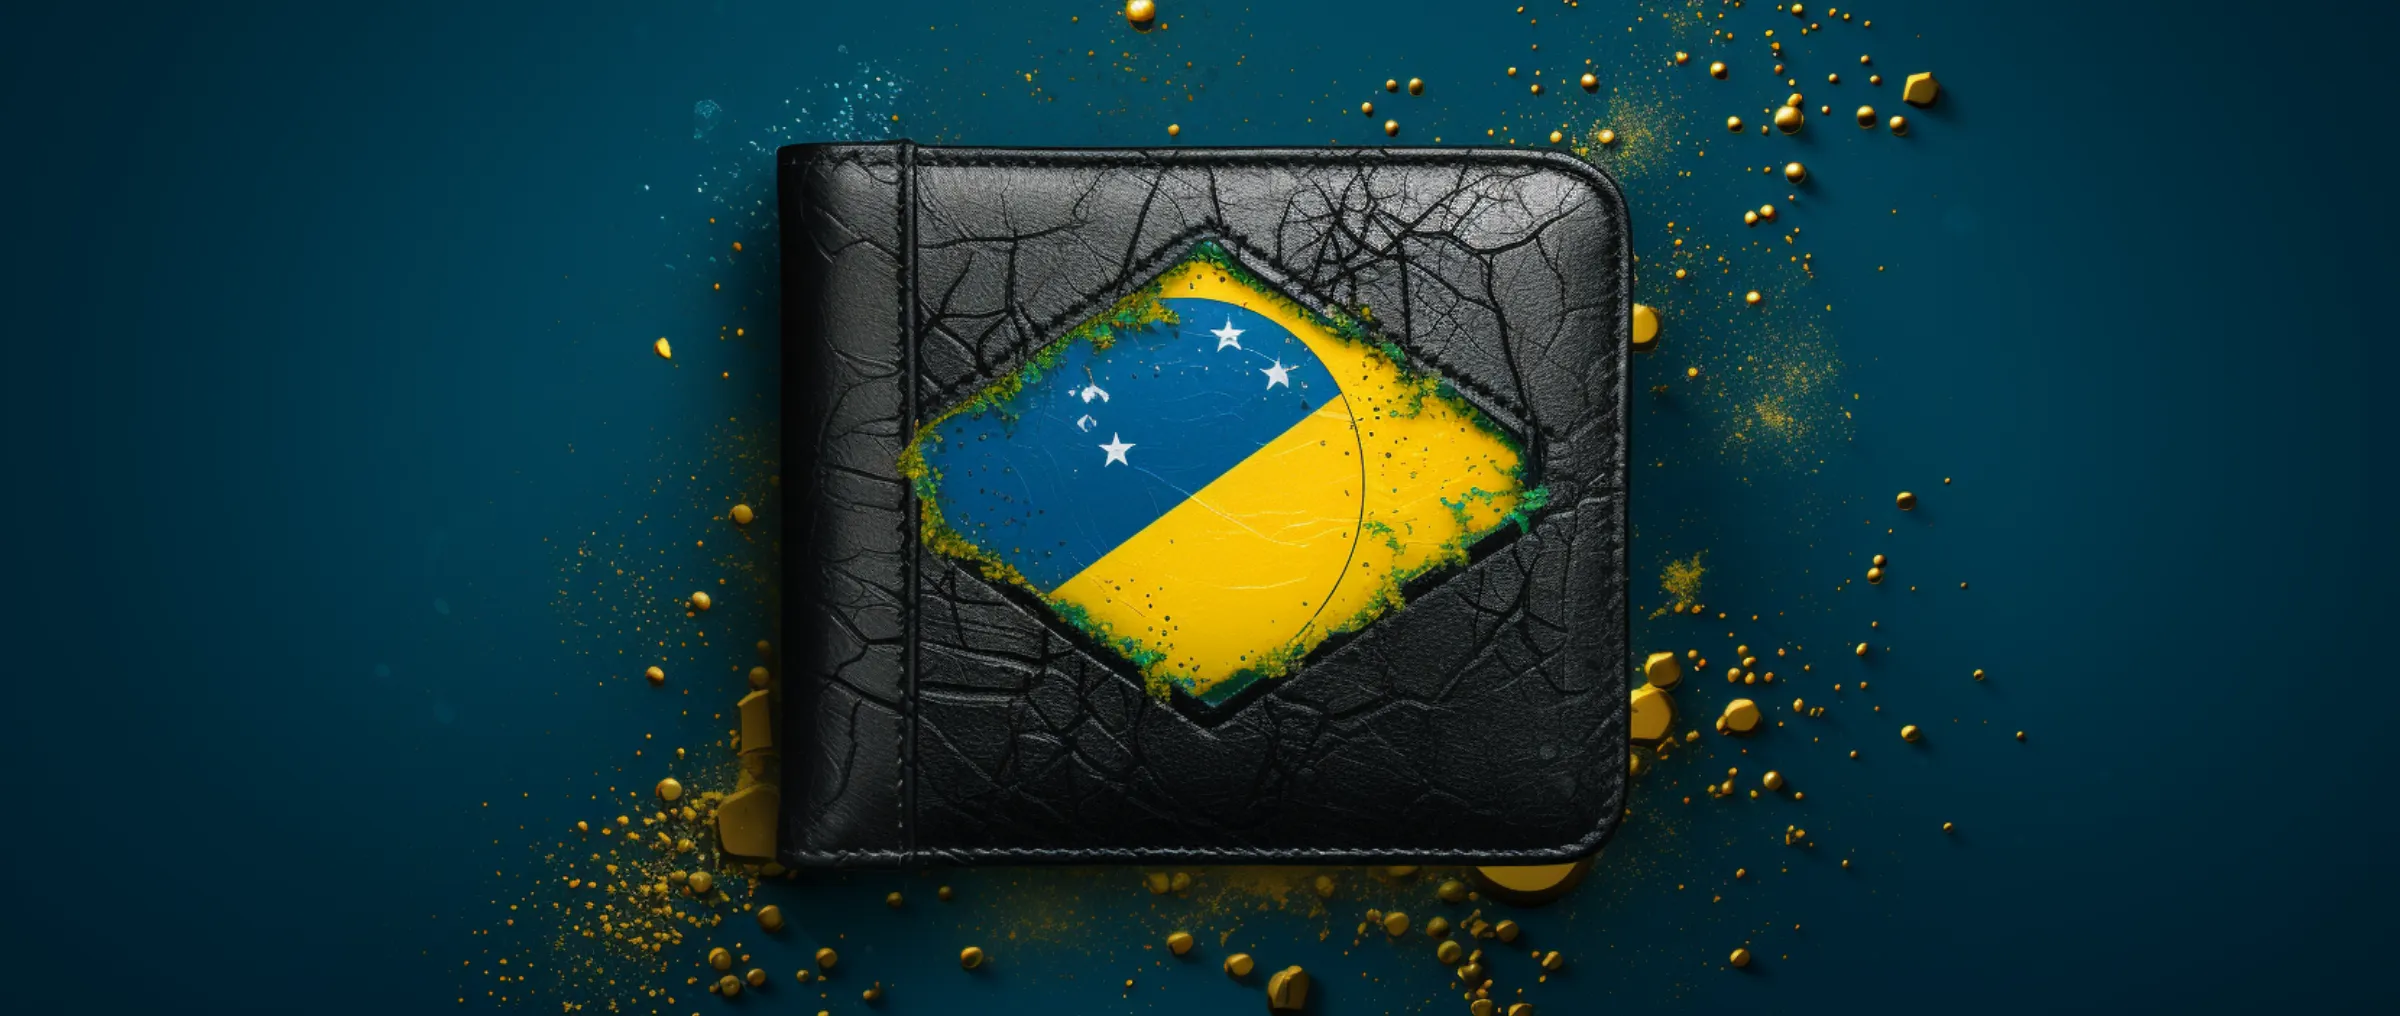 OKX introduces crypto exchange and wallet services in Brazil